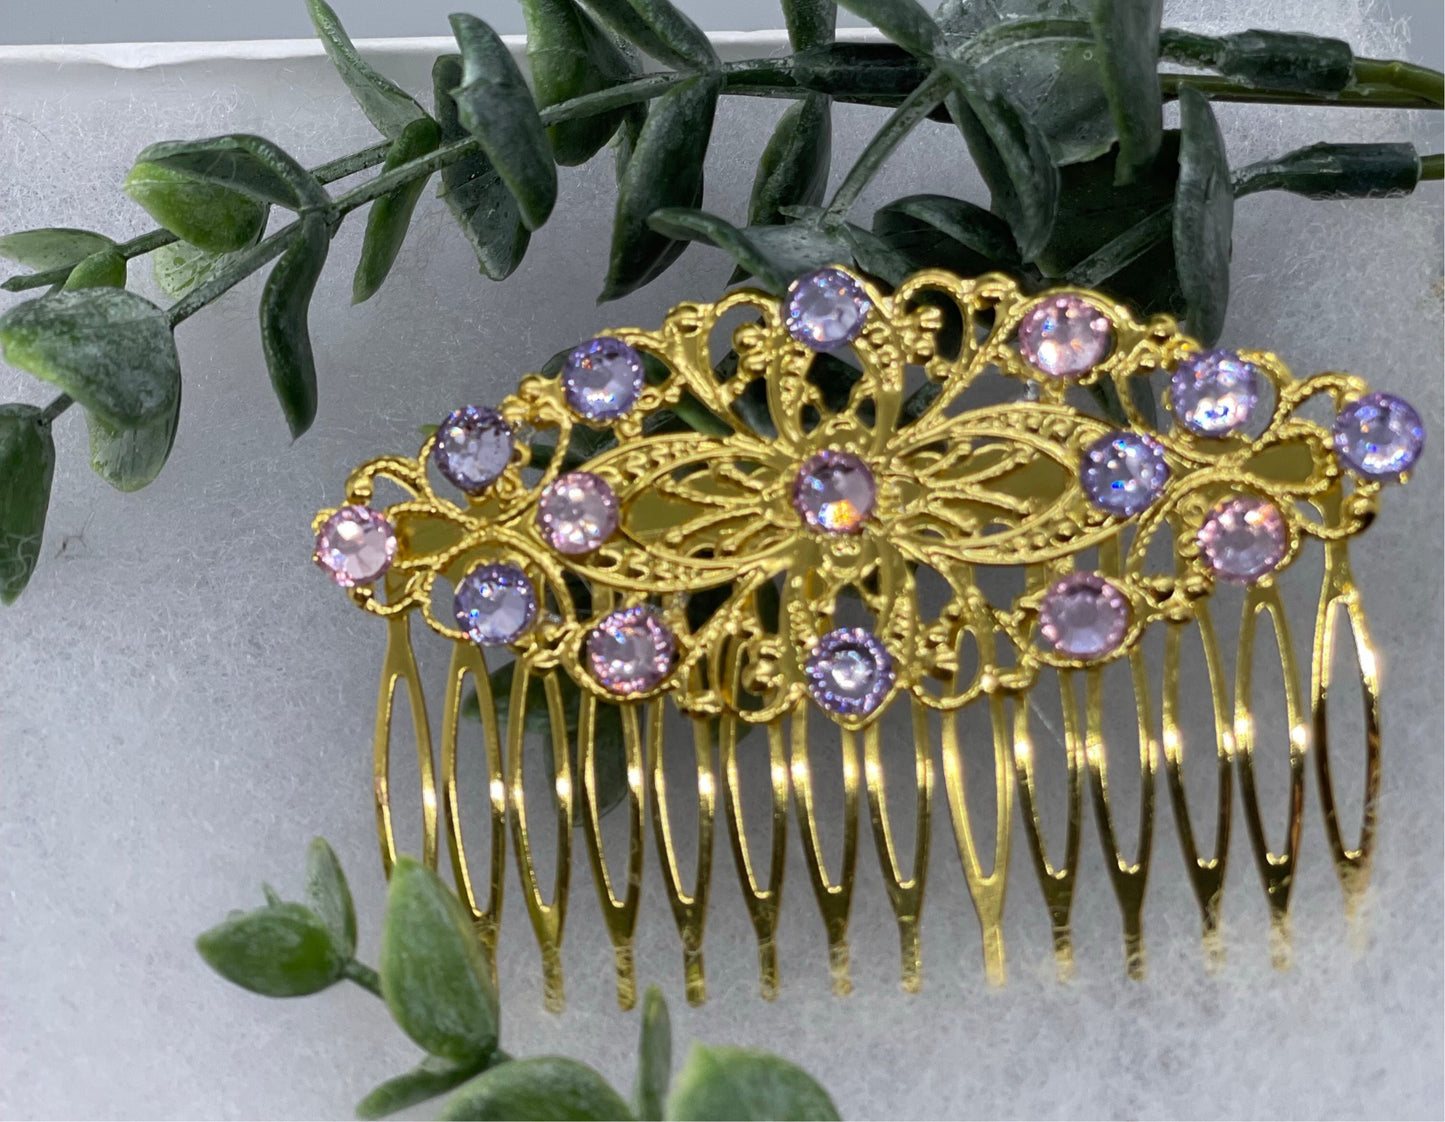 lavender pink crystal vintage style Gold  tone side comb hair accessory accessories gift birthday event formal bridesmaid wedding 3.5” Metal side Comb